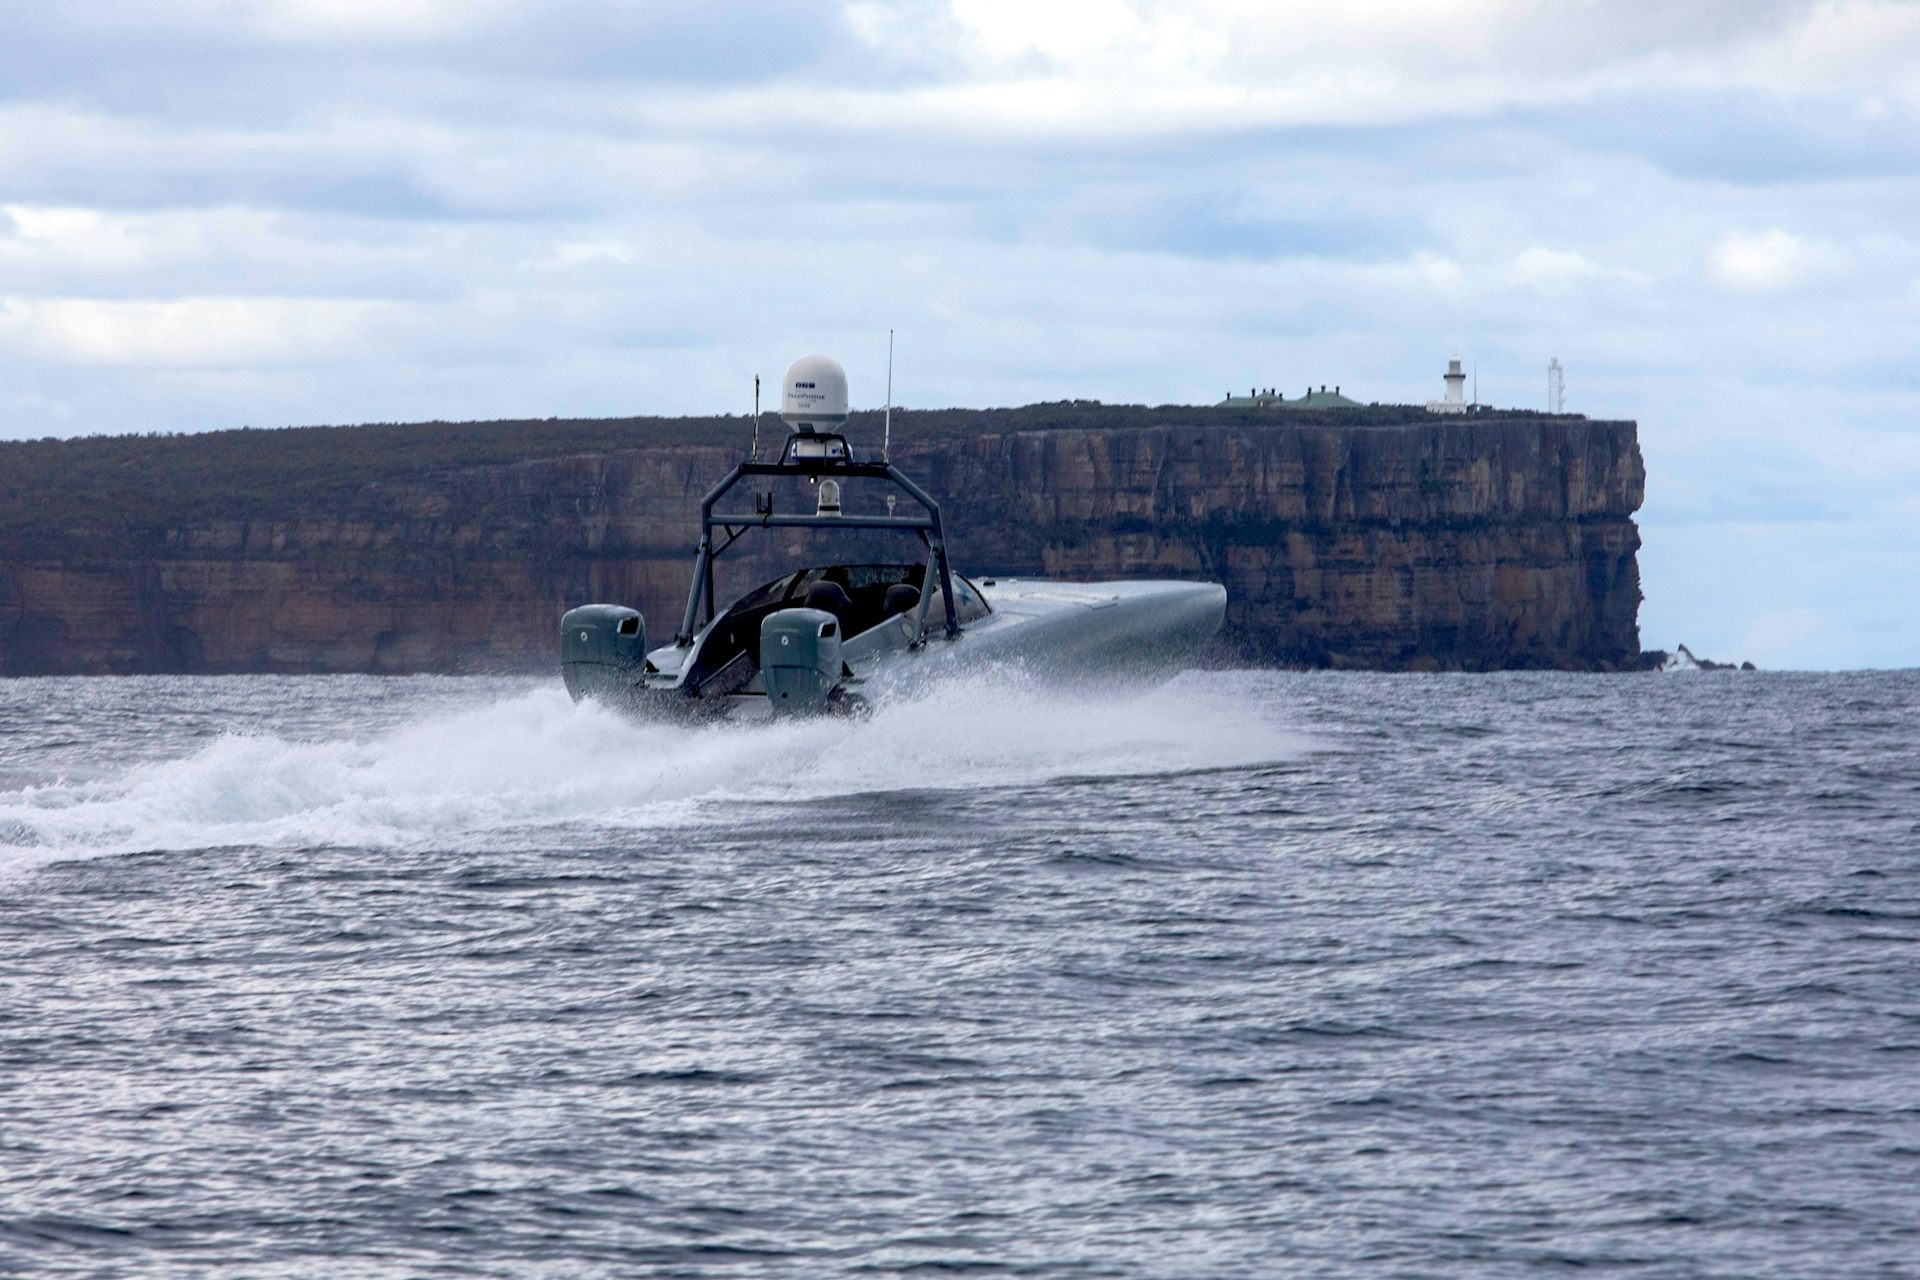 Will Australia's pursuit of unmanned navy boats with heavy weaponry violate international law?